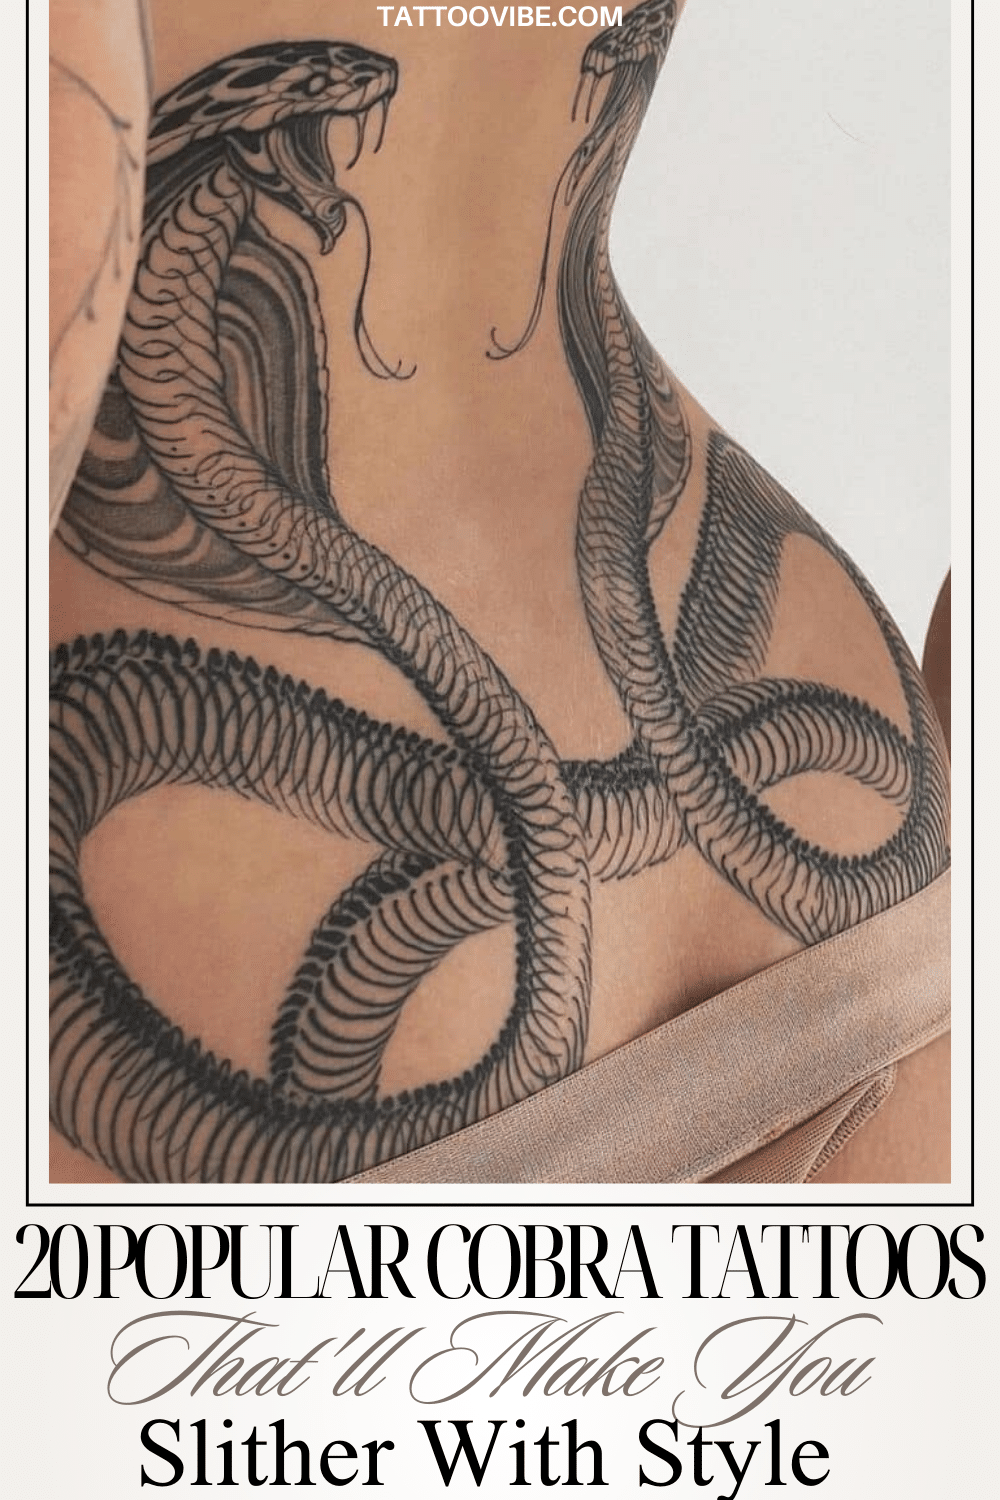 Popular Cobra Tattoos That'll Make You Slither With Style